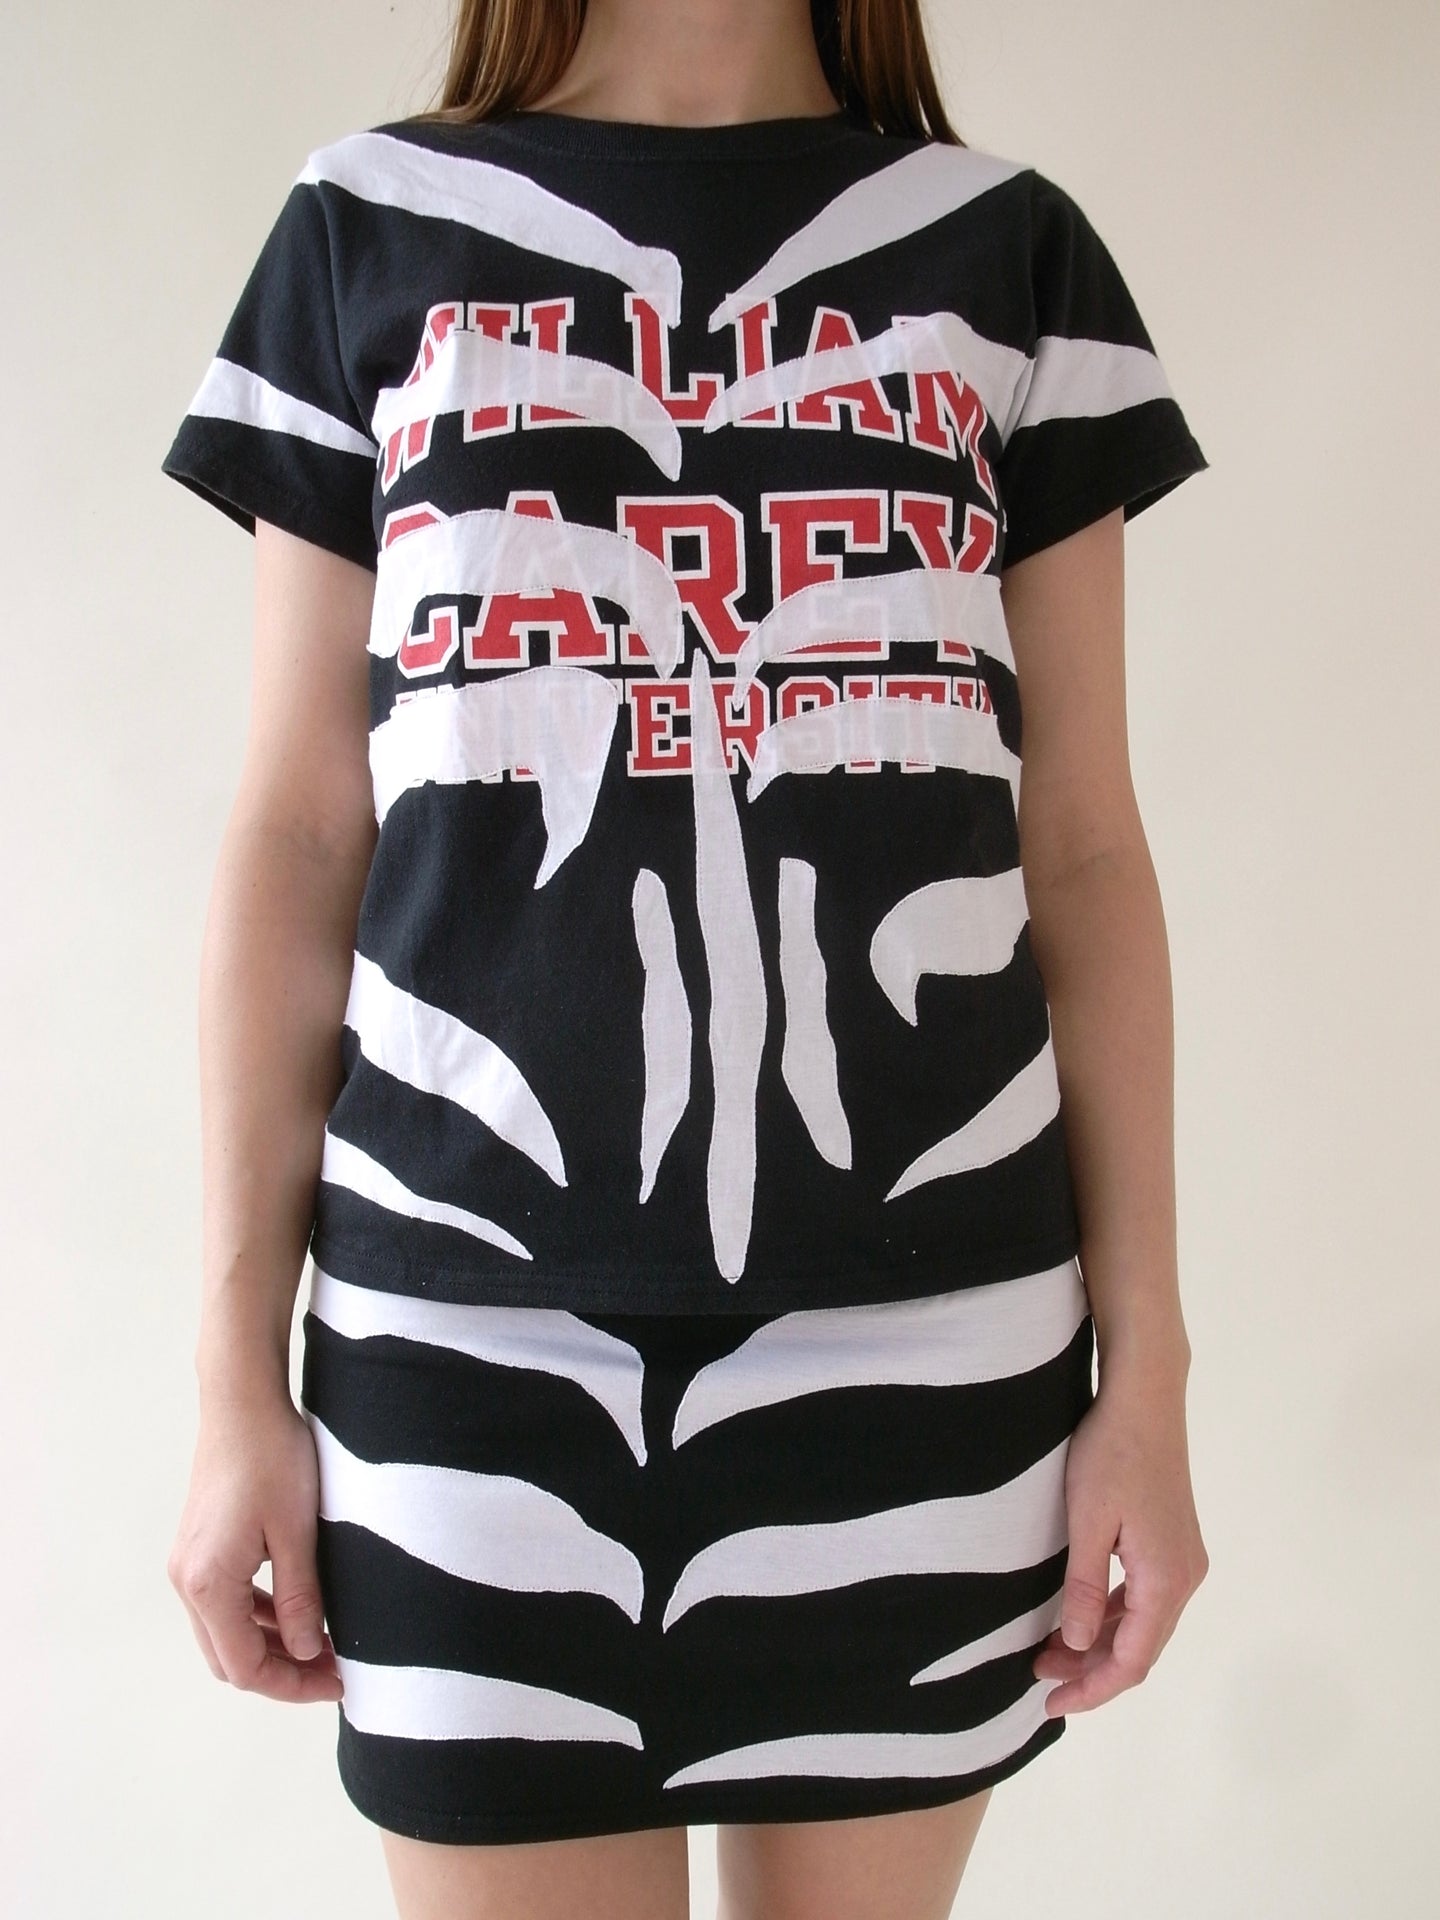 The Reconstituted Zebra T-shirt